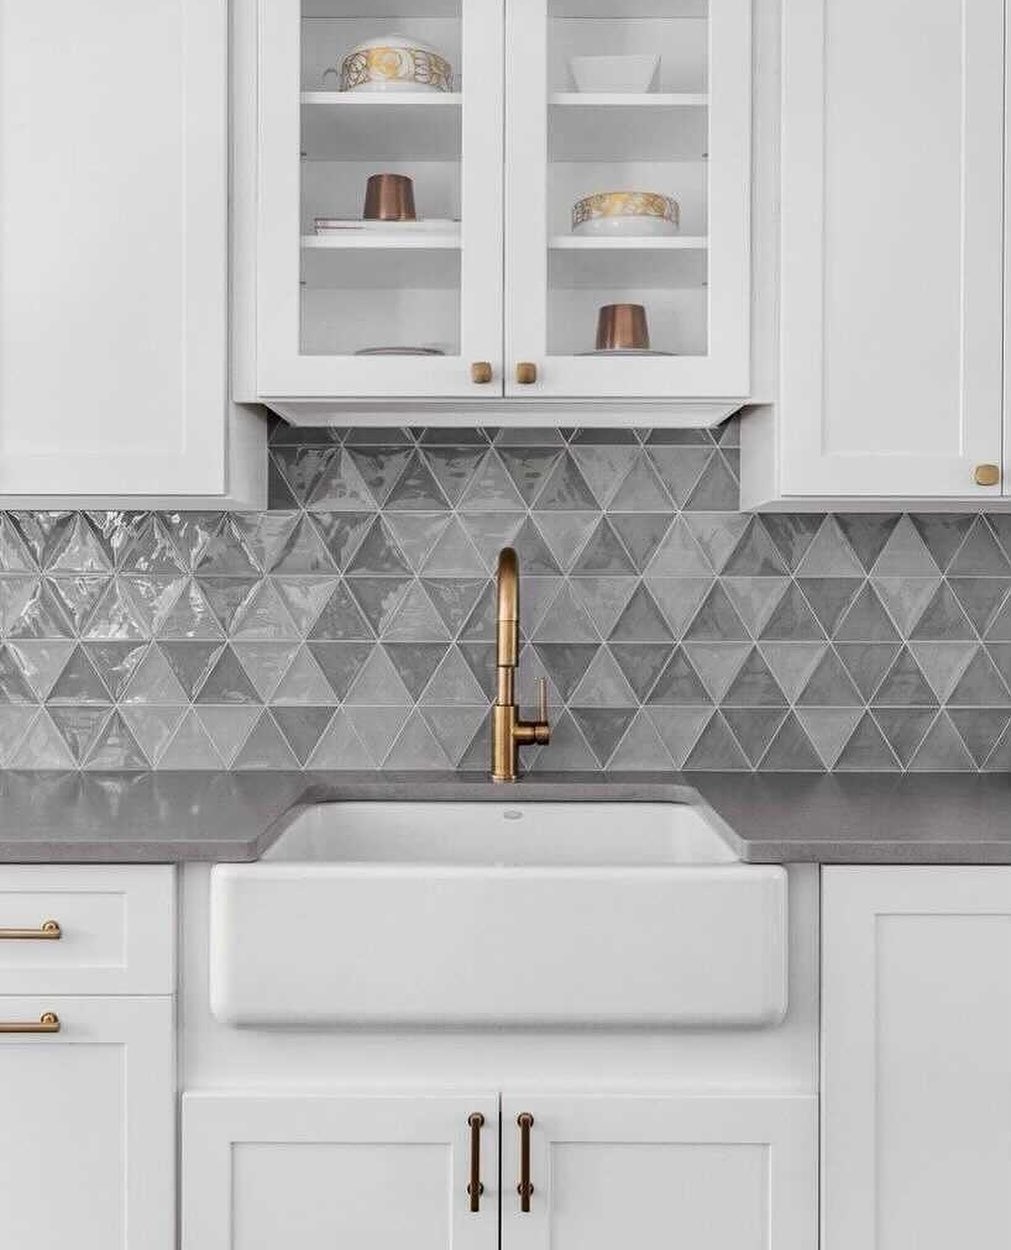 our Bellami Triangulo Grigio 5x4 Glazed Ceramic Tile shown in the kitchen as a backsplash and wall tile